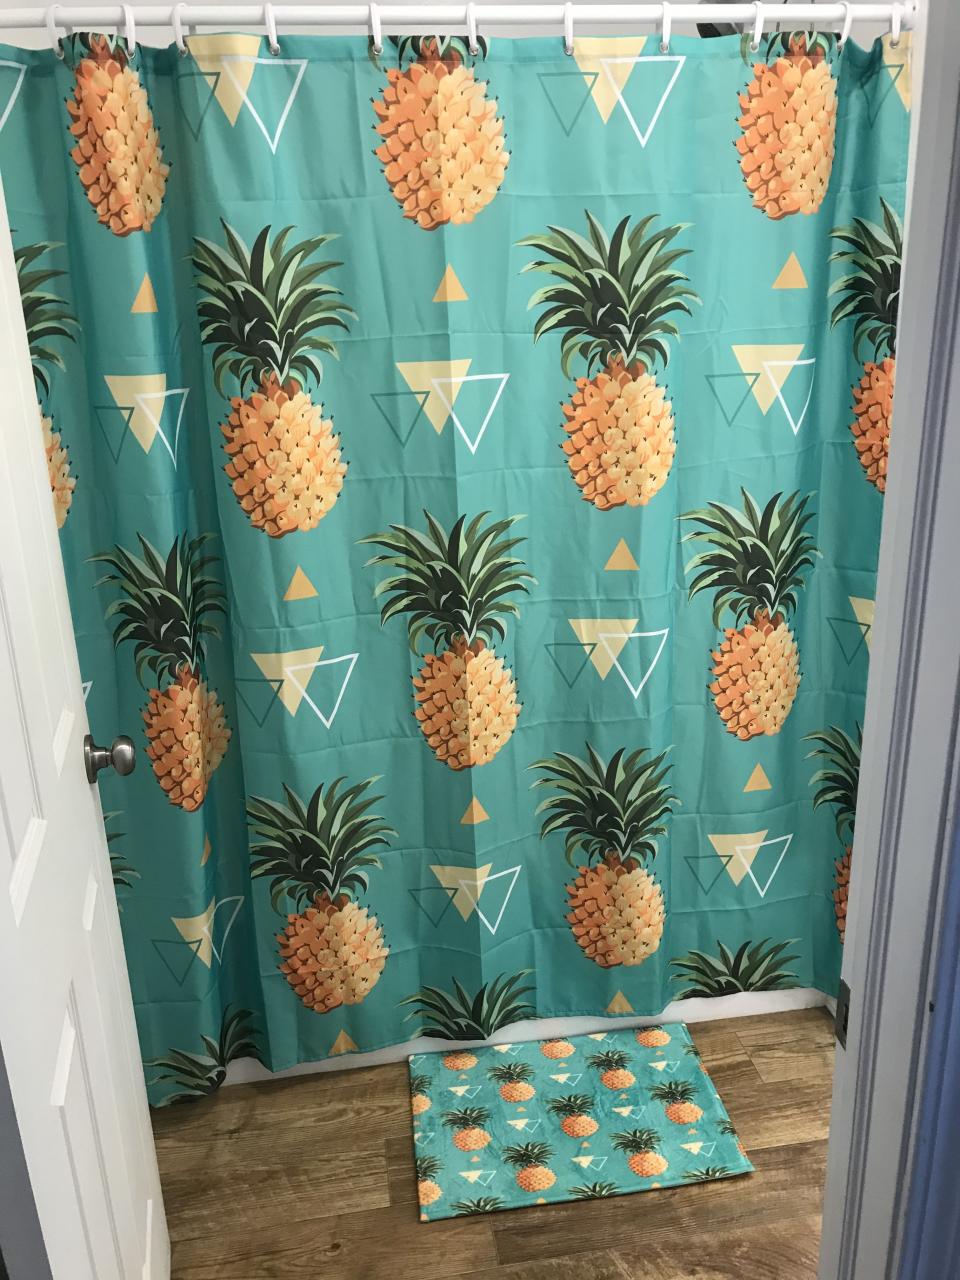 Awesome Pineapple Bathroom Decor Best Home Design